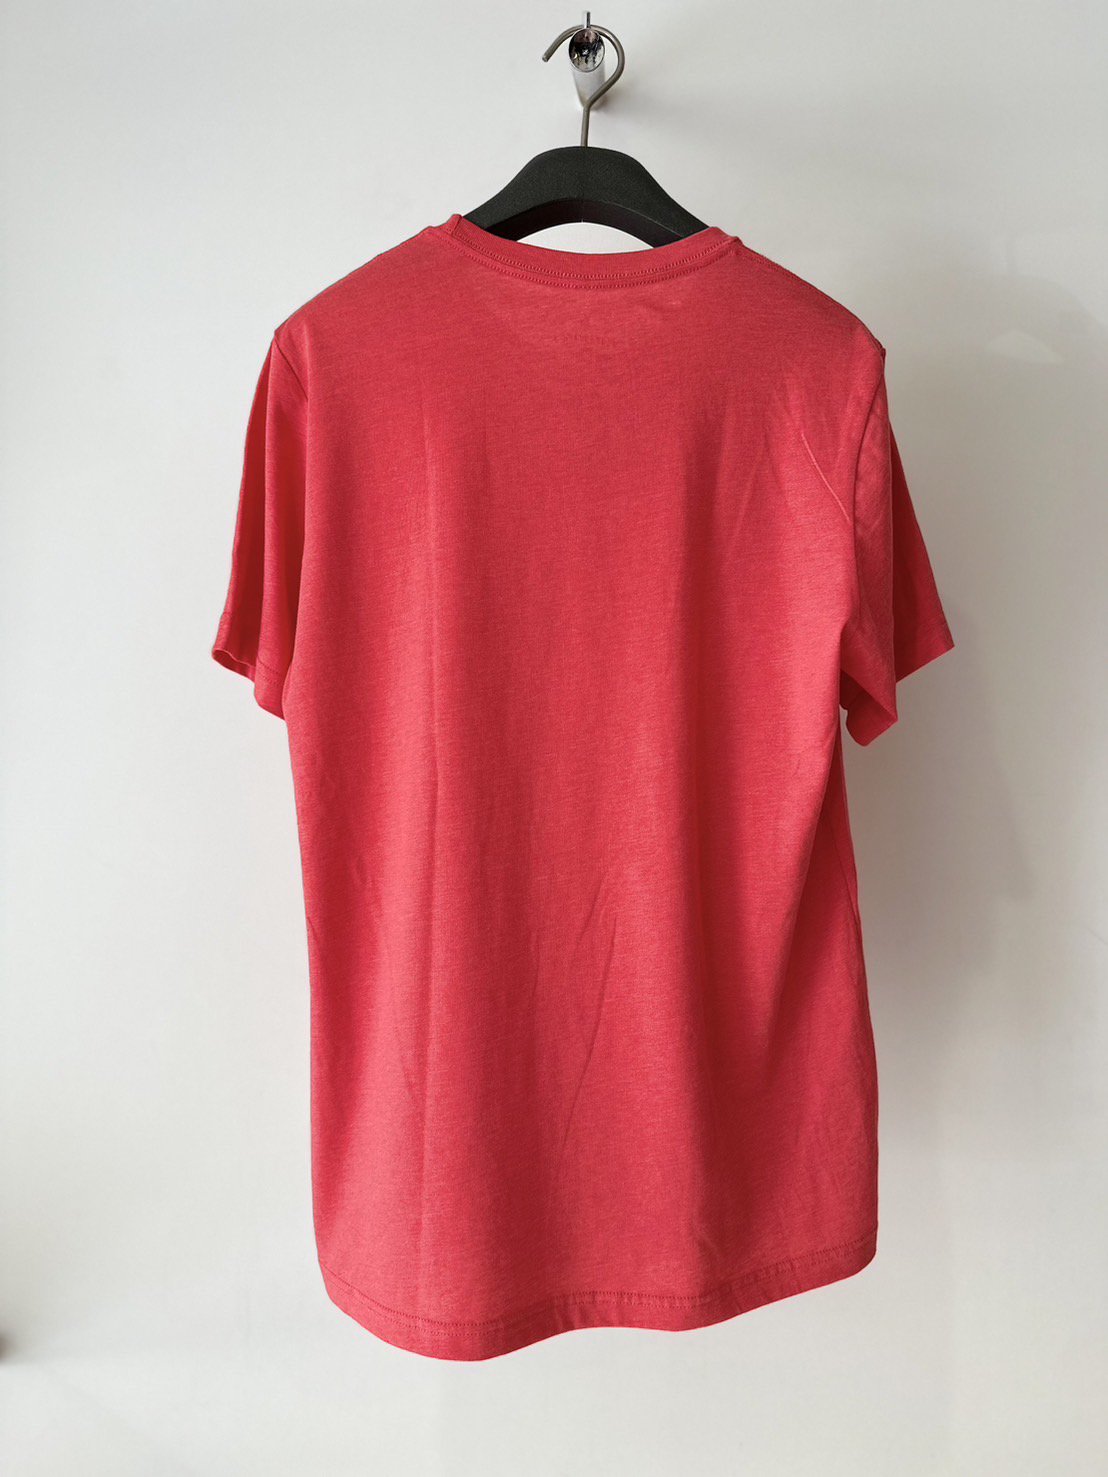 BLUESCENTRIC<br />DAVID BOWIE LOGO VINTAGE TEE / RED<img class='new_mark_img2' src='https://img.shop-pro.jp/img/new/icons47.gif' style='border:none;display:inline;margin:0px;padding:0px;width:auto;' />